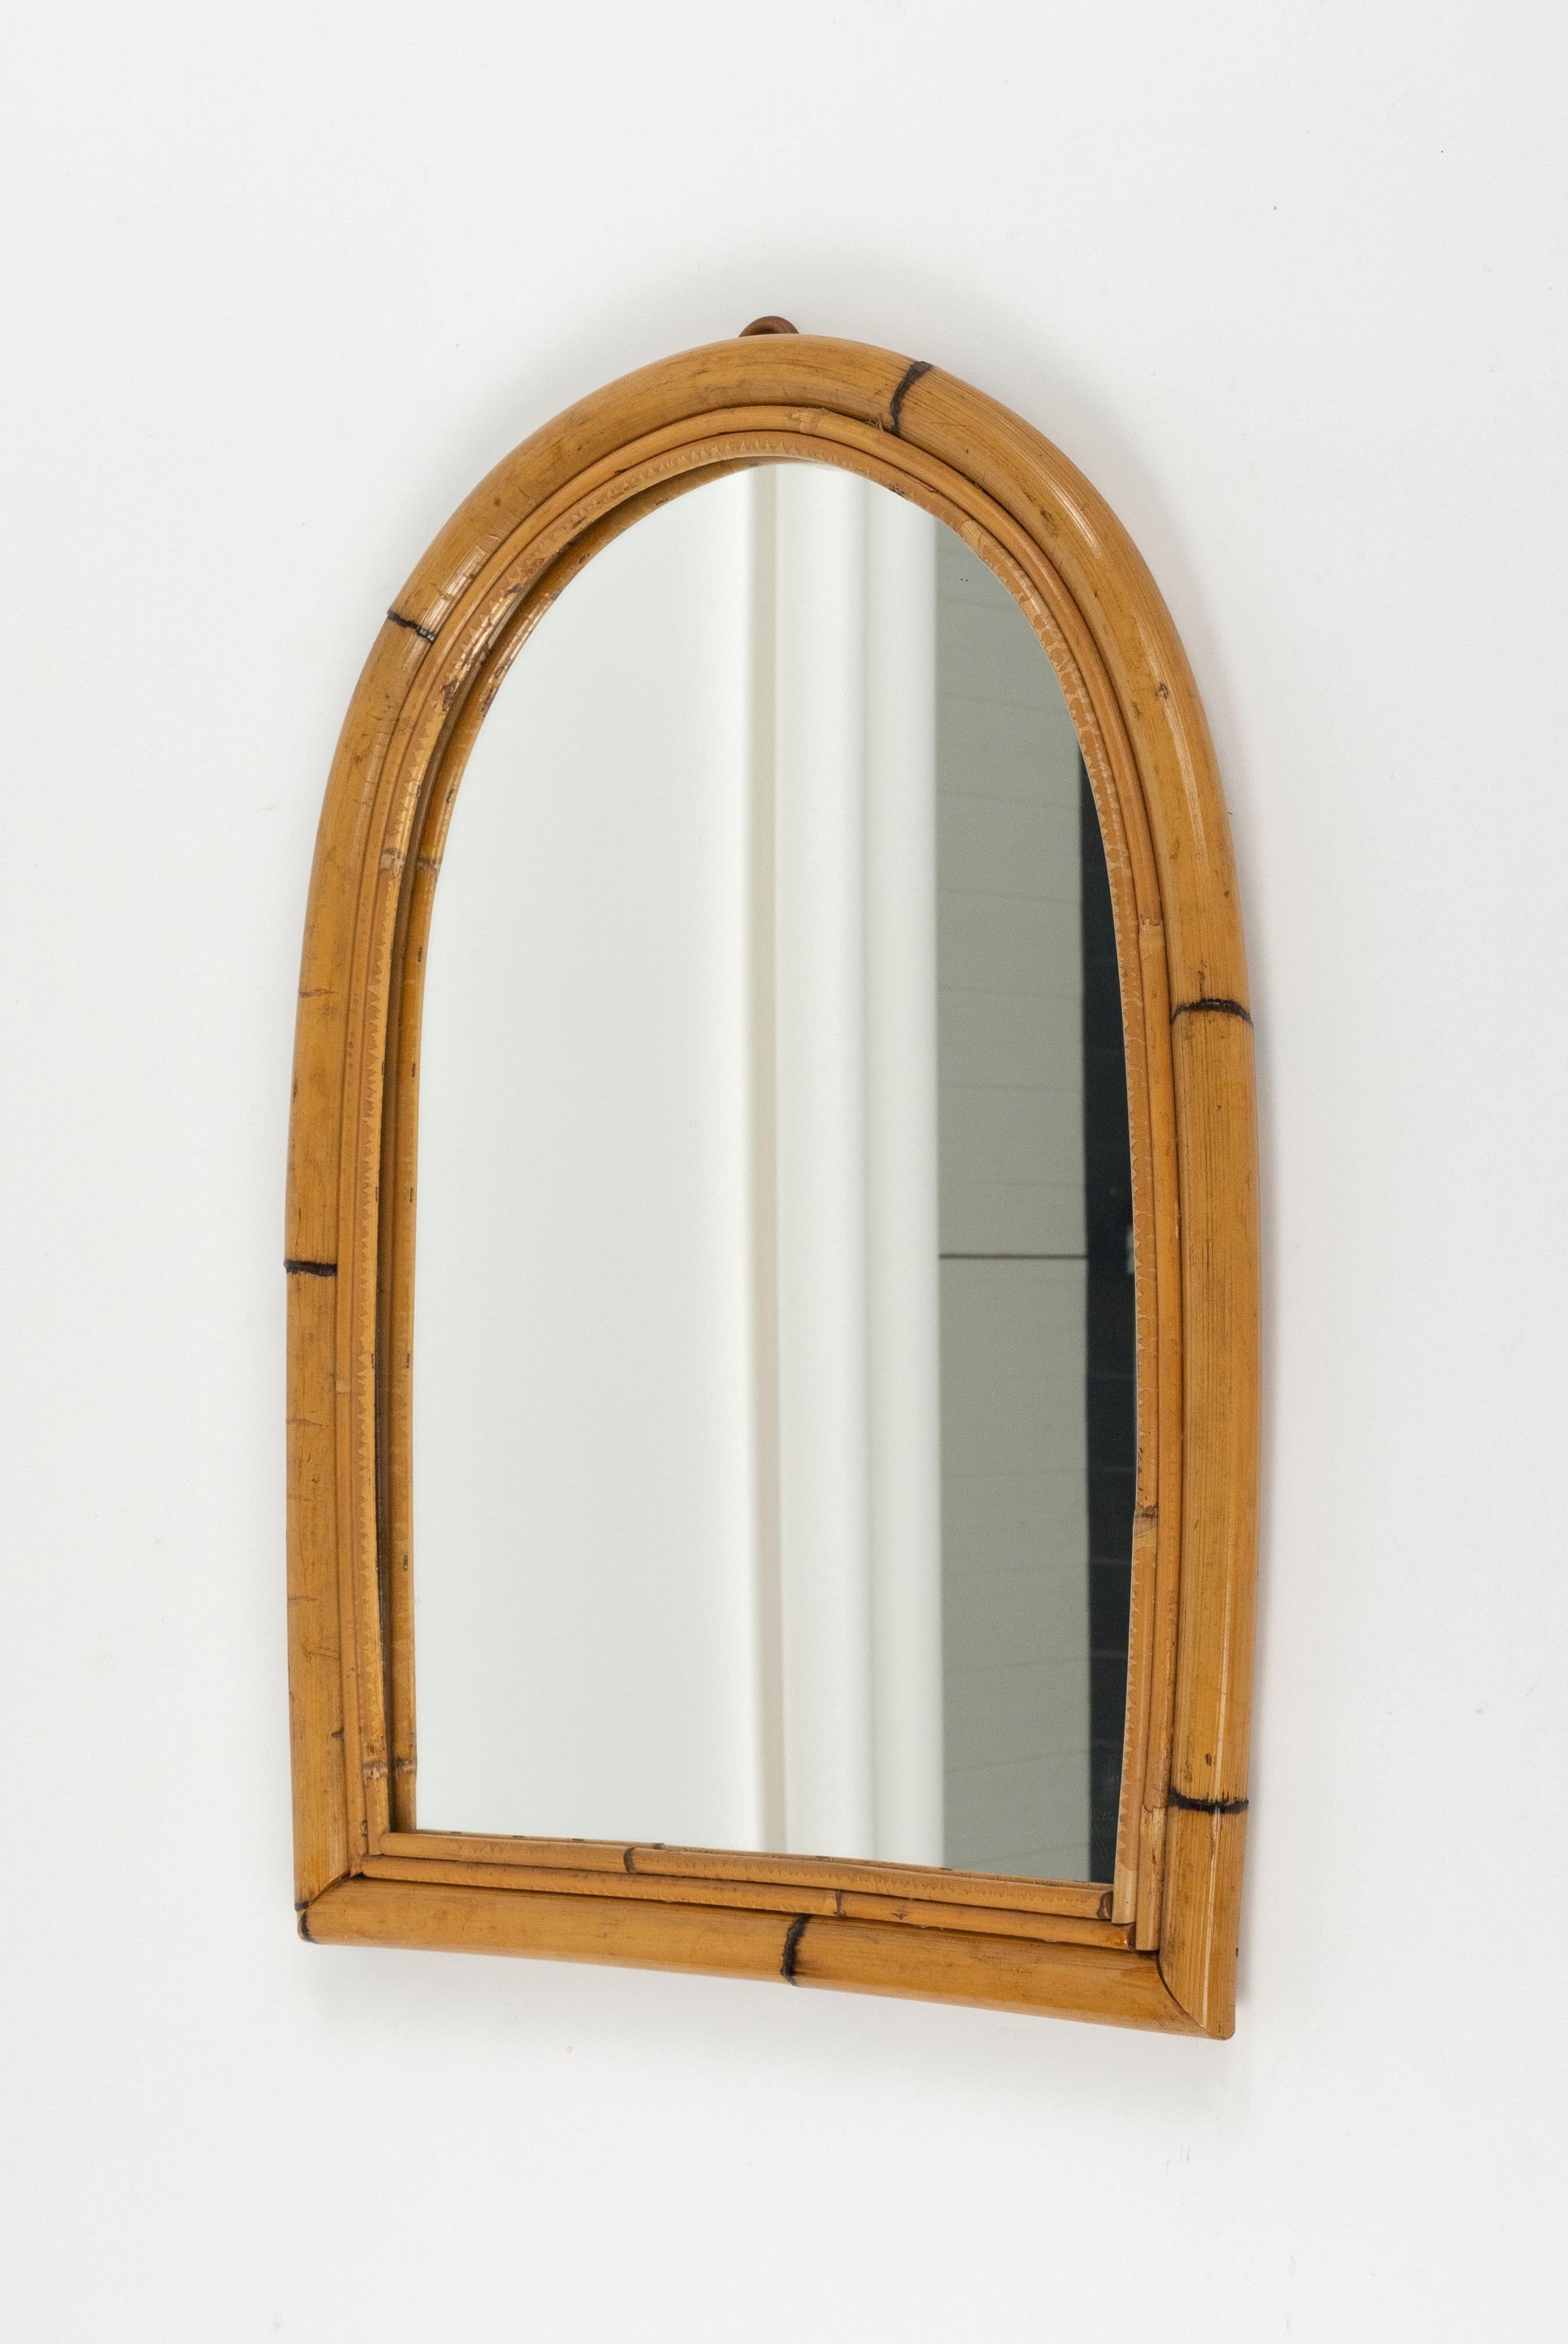 Midcentury Rattan and Bamboo Arched Wall Mirror, Italy 1960s For Sale 4